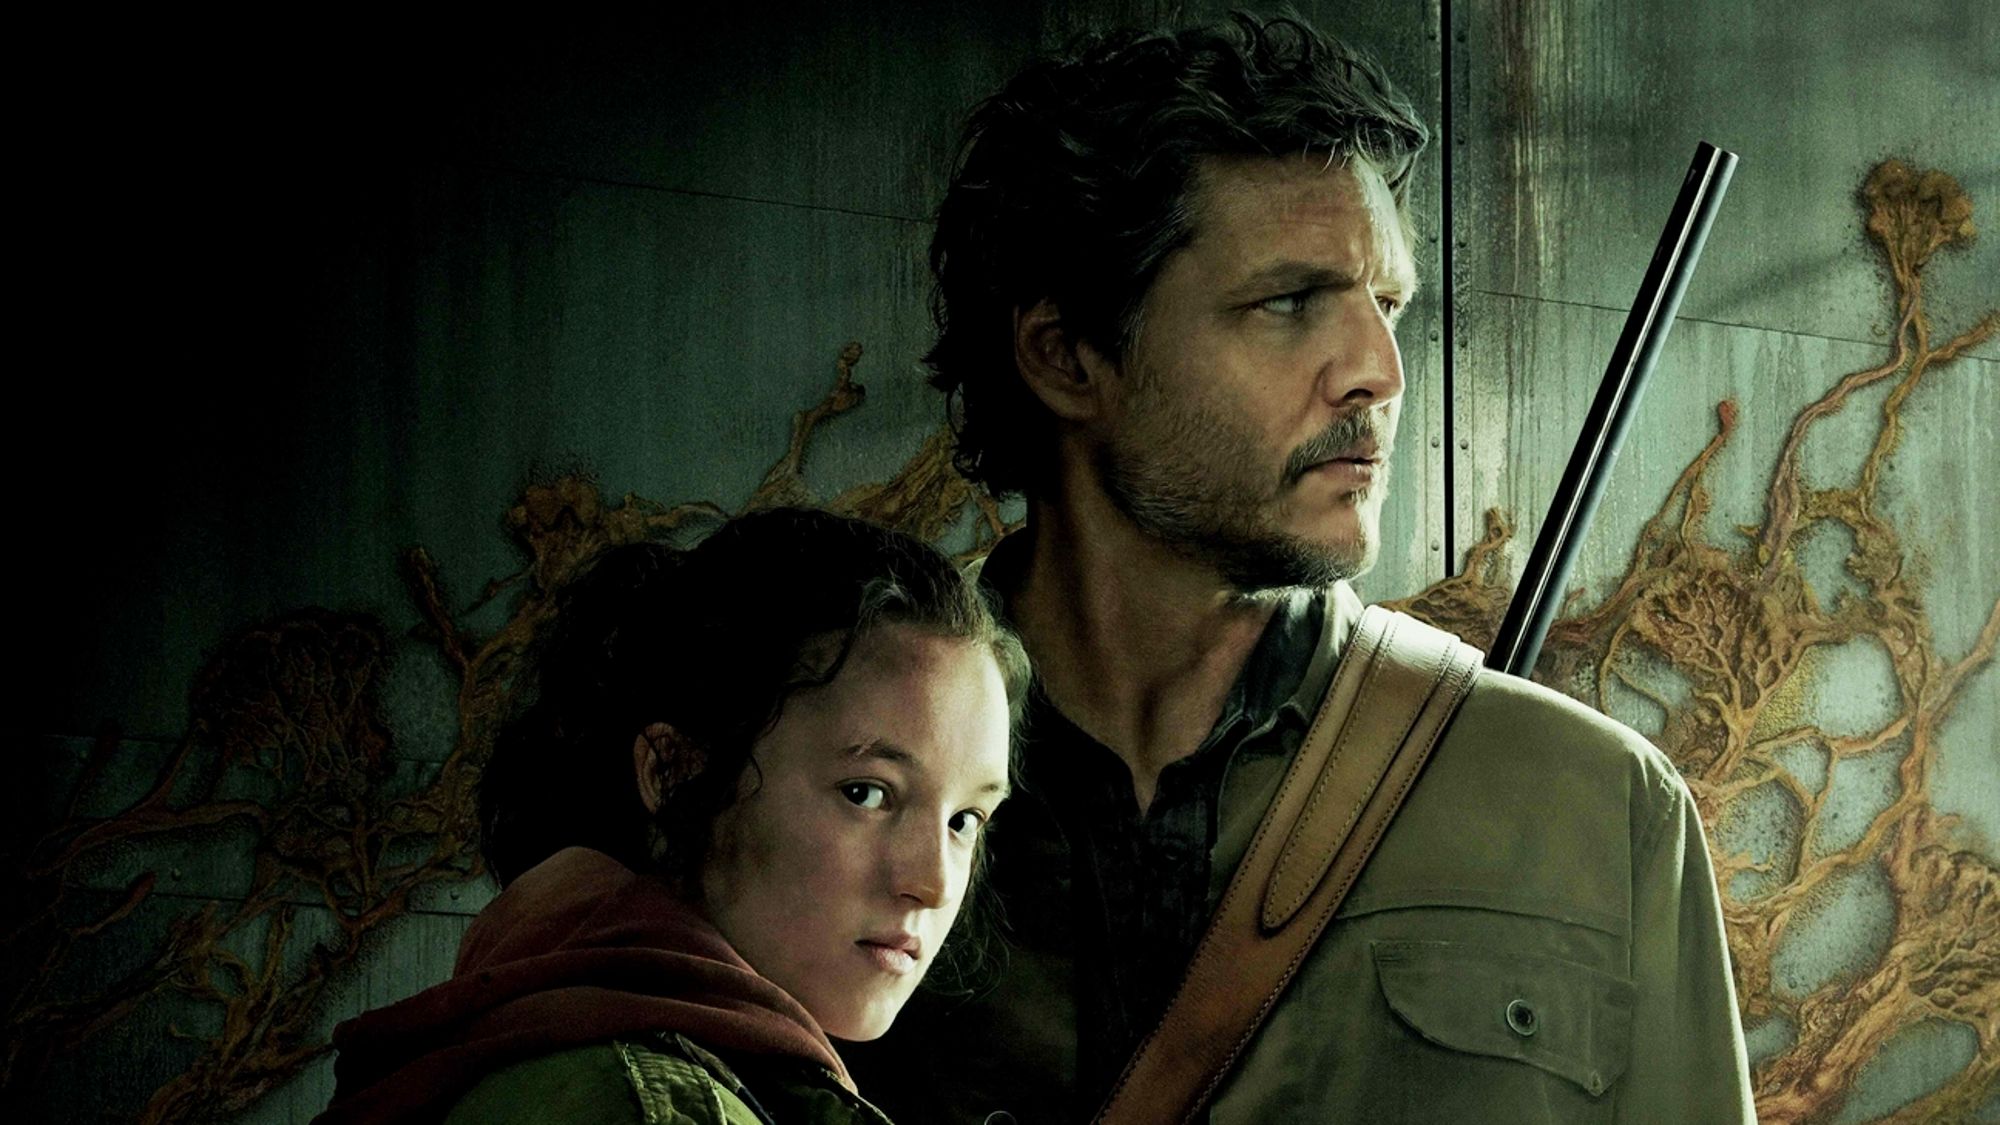 The Last of Us poster featuring Bella Ramsey and Pedro Pascal